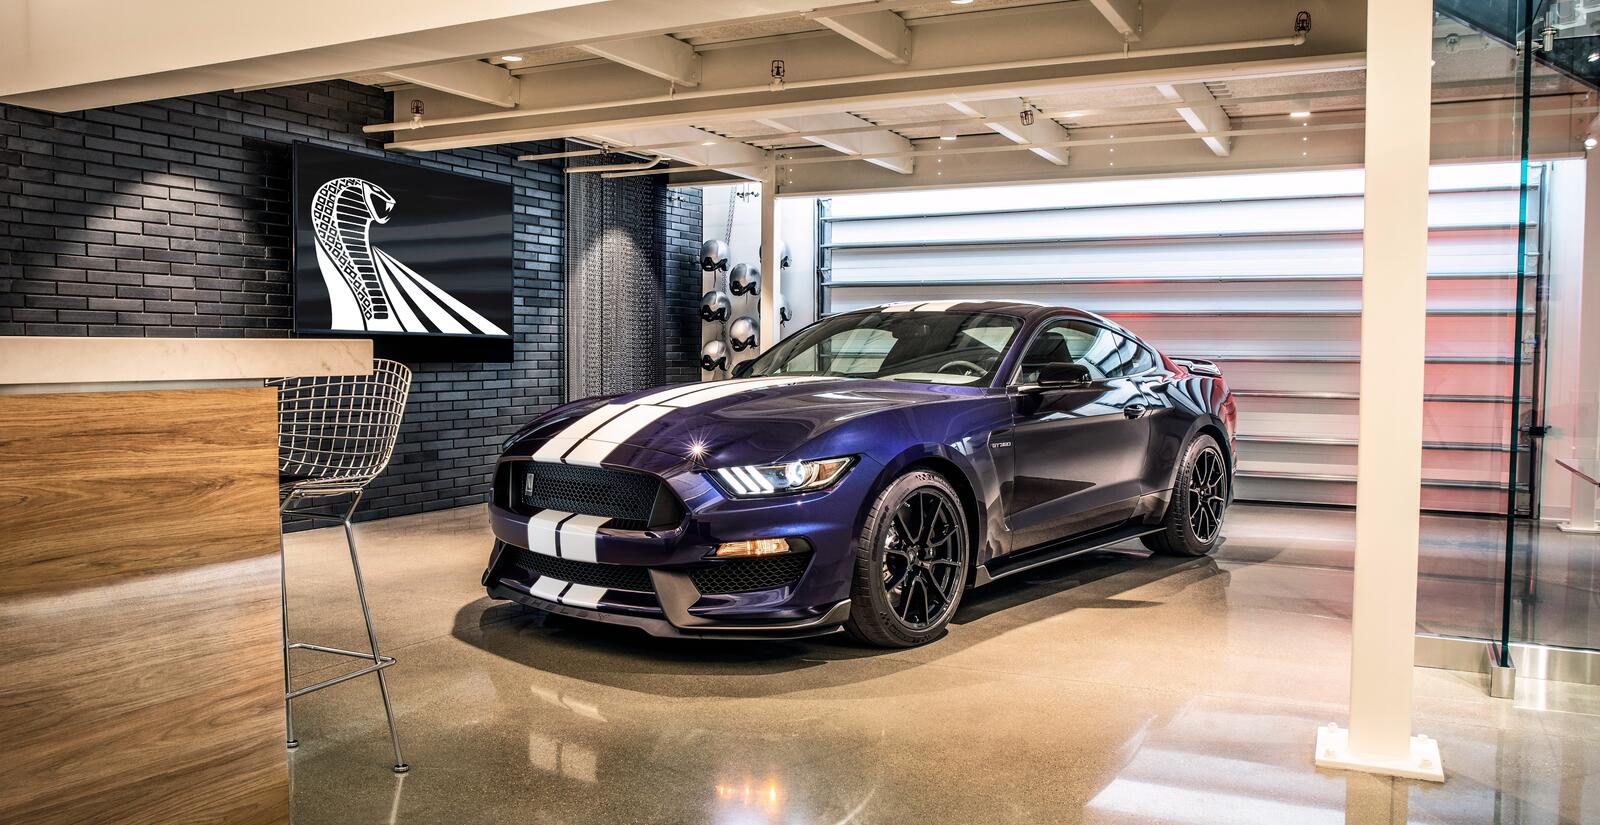 Free photo Ford mustang shelby gt350 in a clean, bright garage